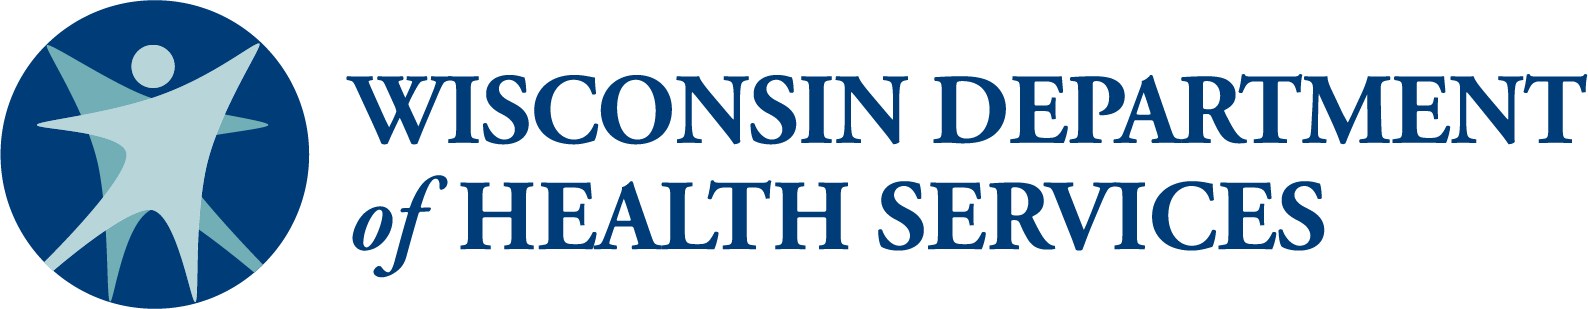 wisconsin dept of health services logo